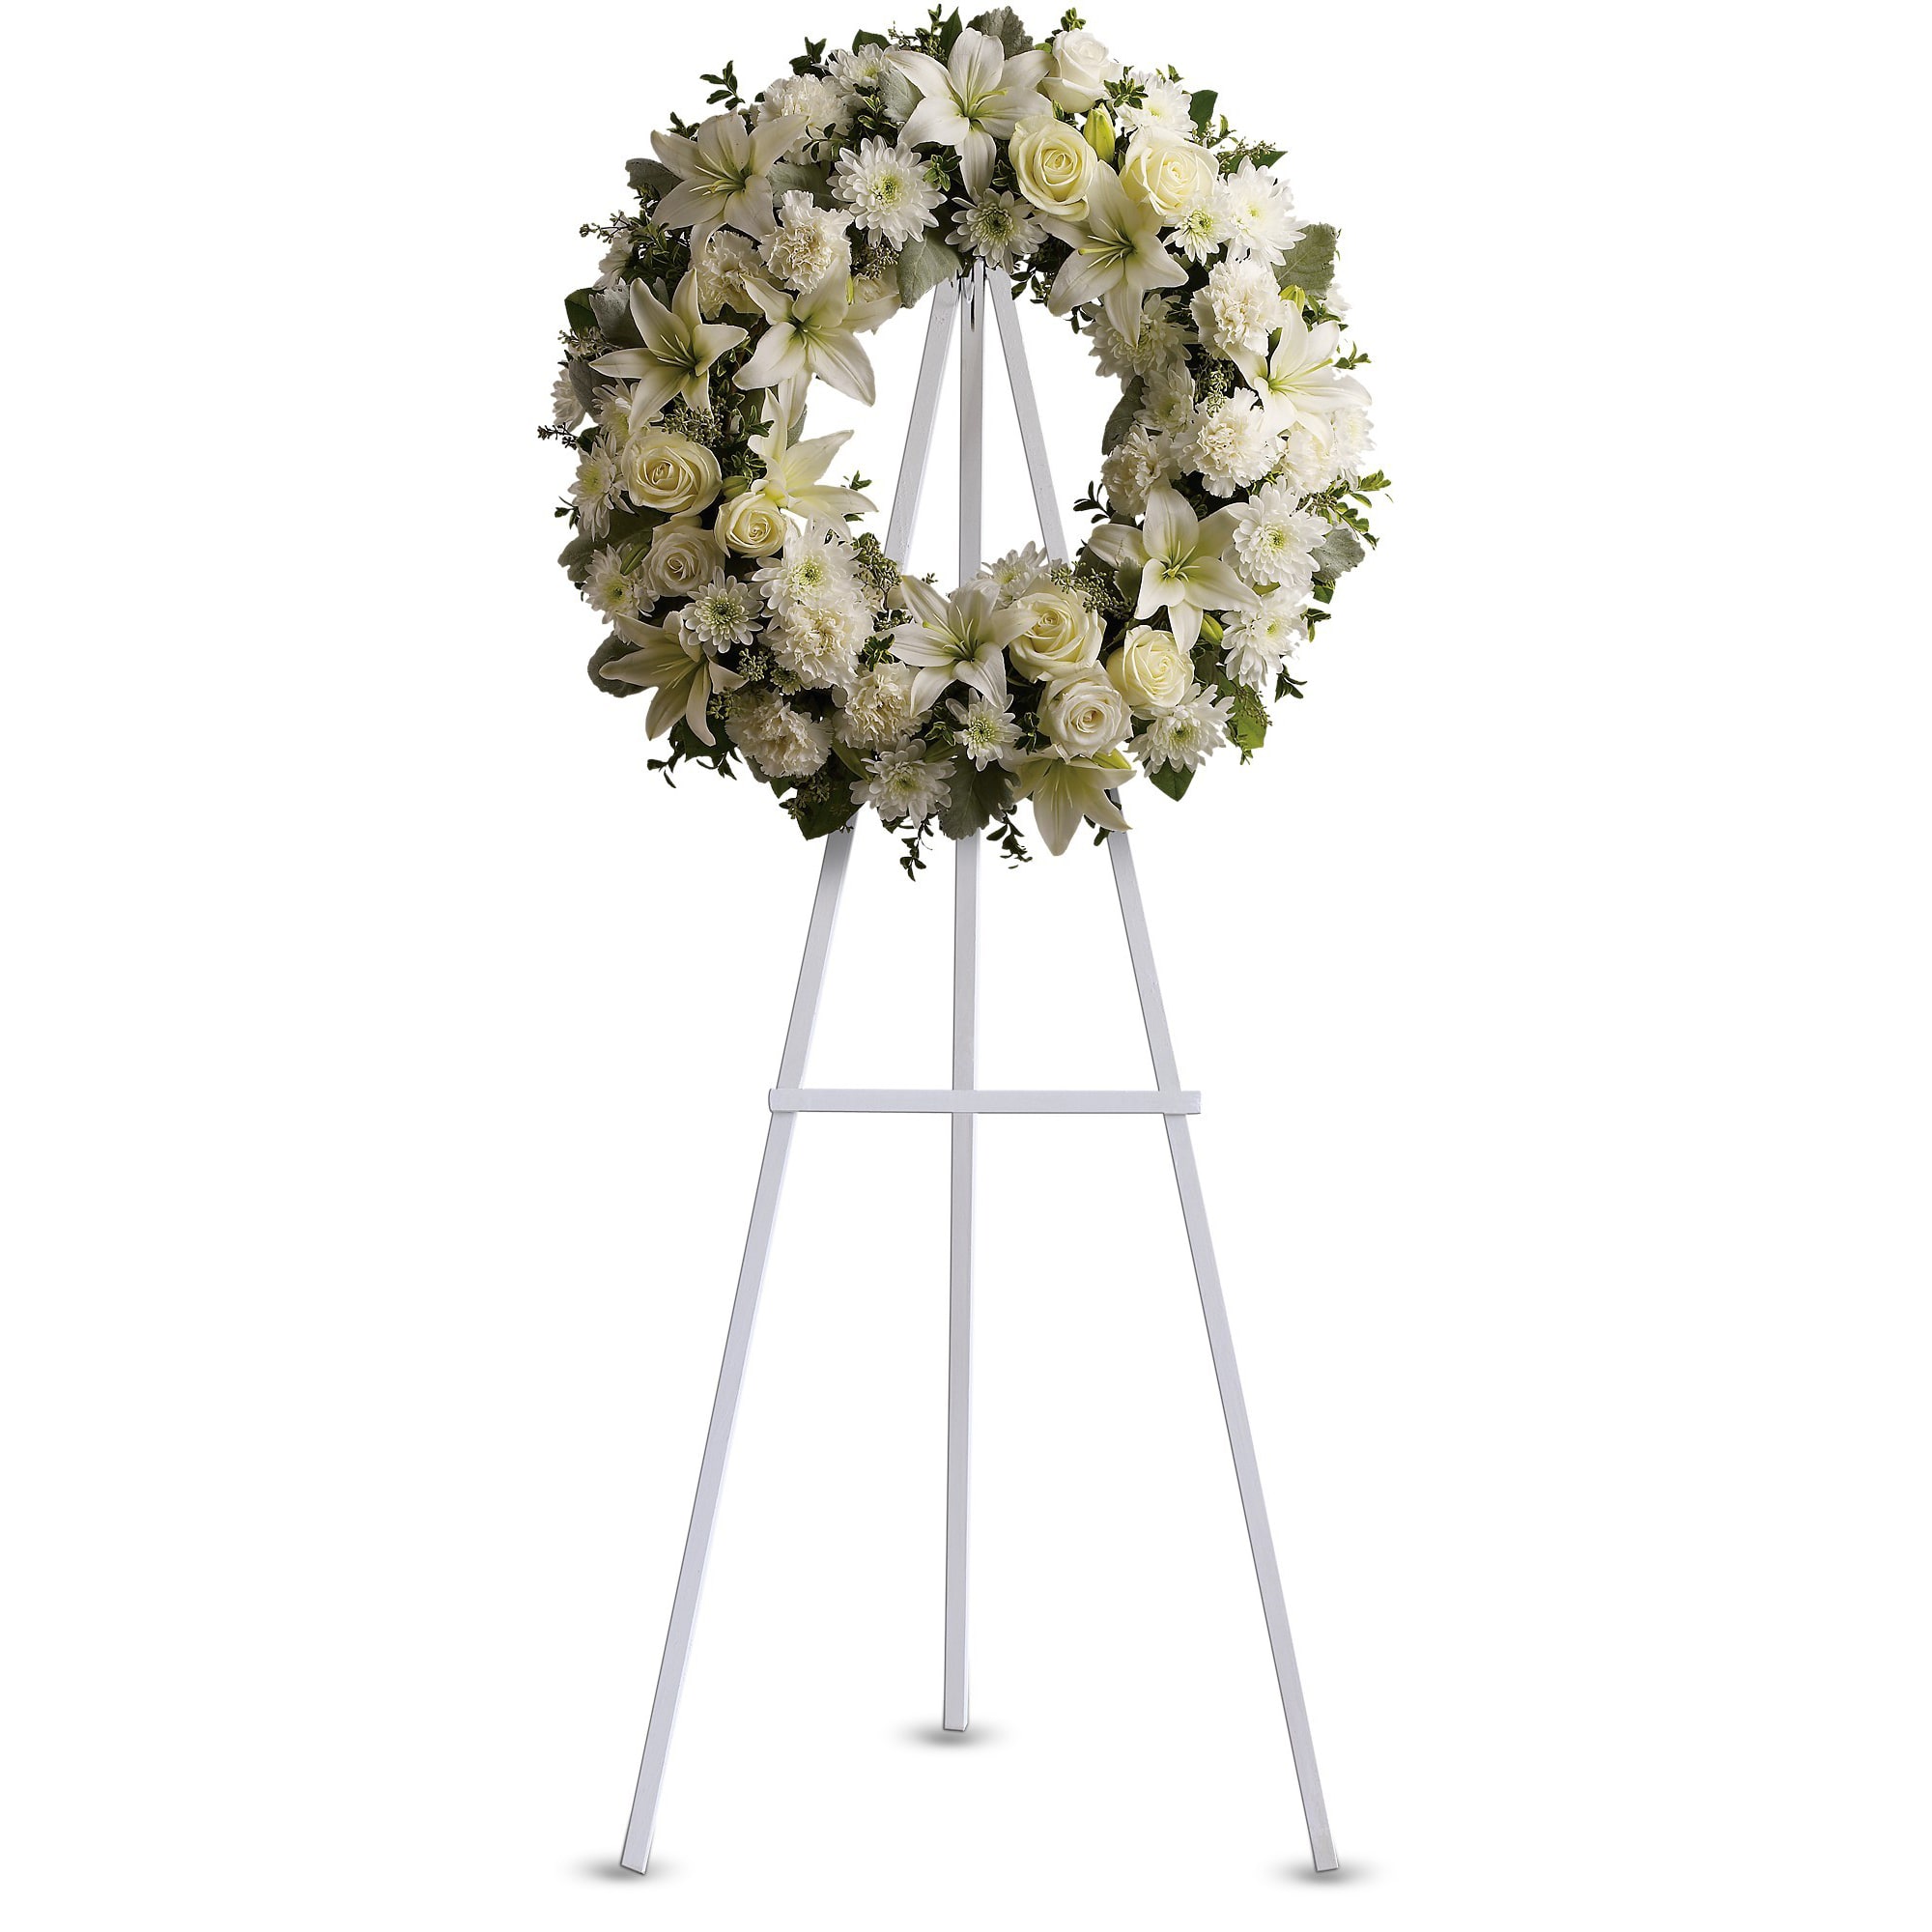 Serenity Wreath - A ring of fragrant, bright white blossoms will create a serene display at any funeral or wake. This classic wreath is delivered on an easel, and is a thoughtful expression of sympathy and admiration. 